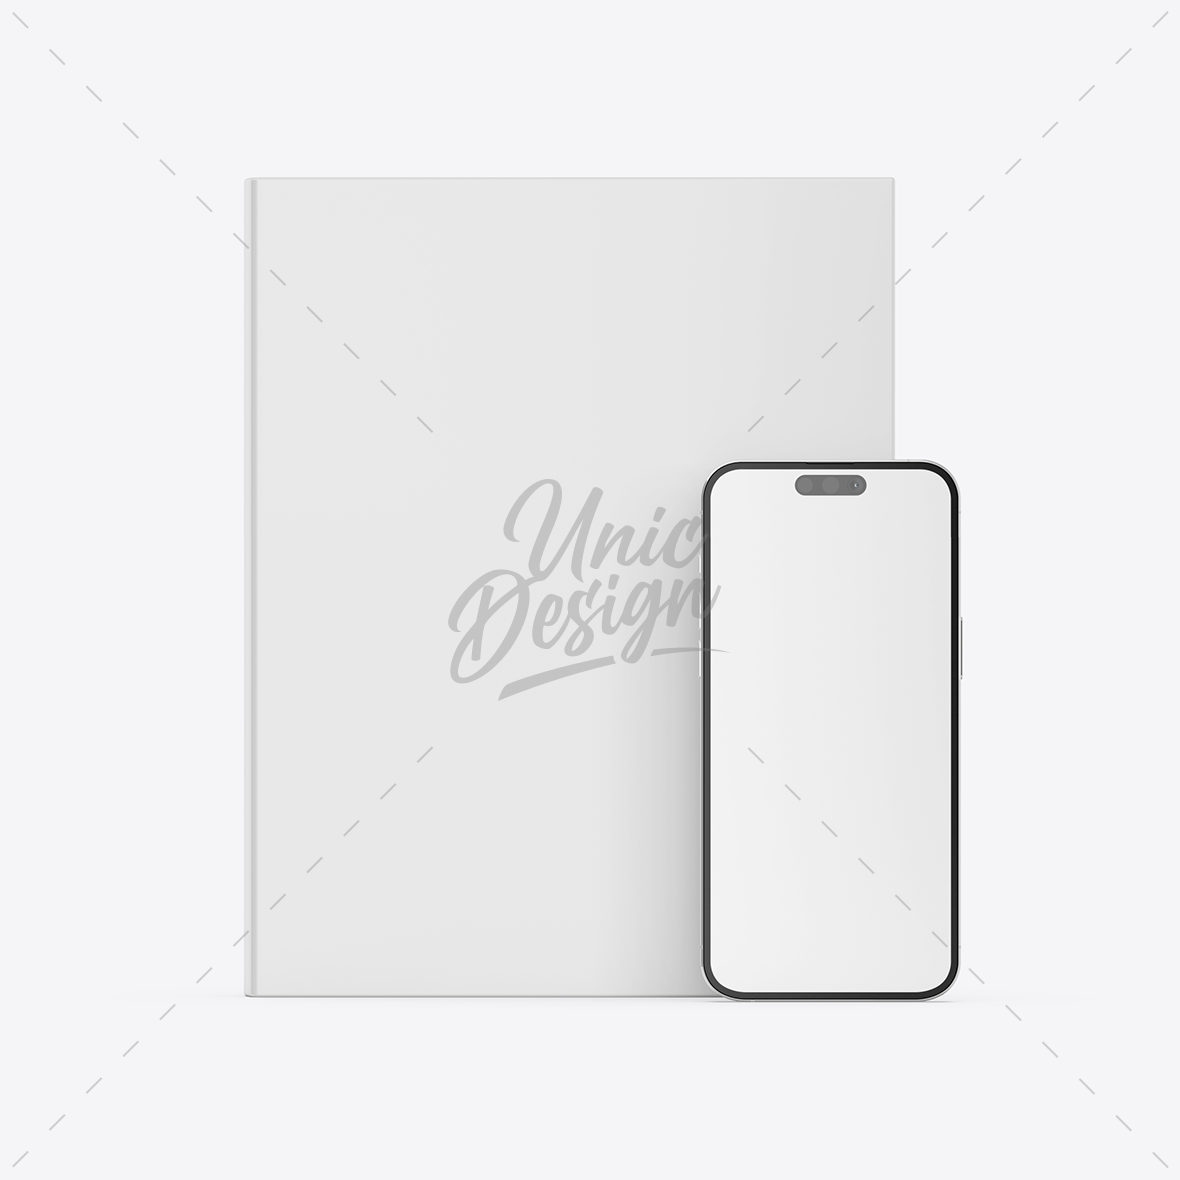 US Letter Book & iPhone 15 Mockup